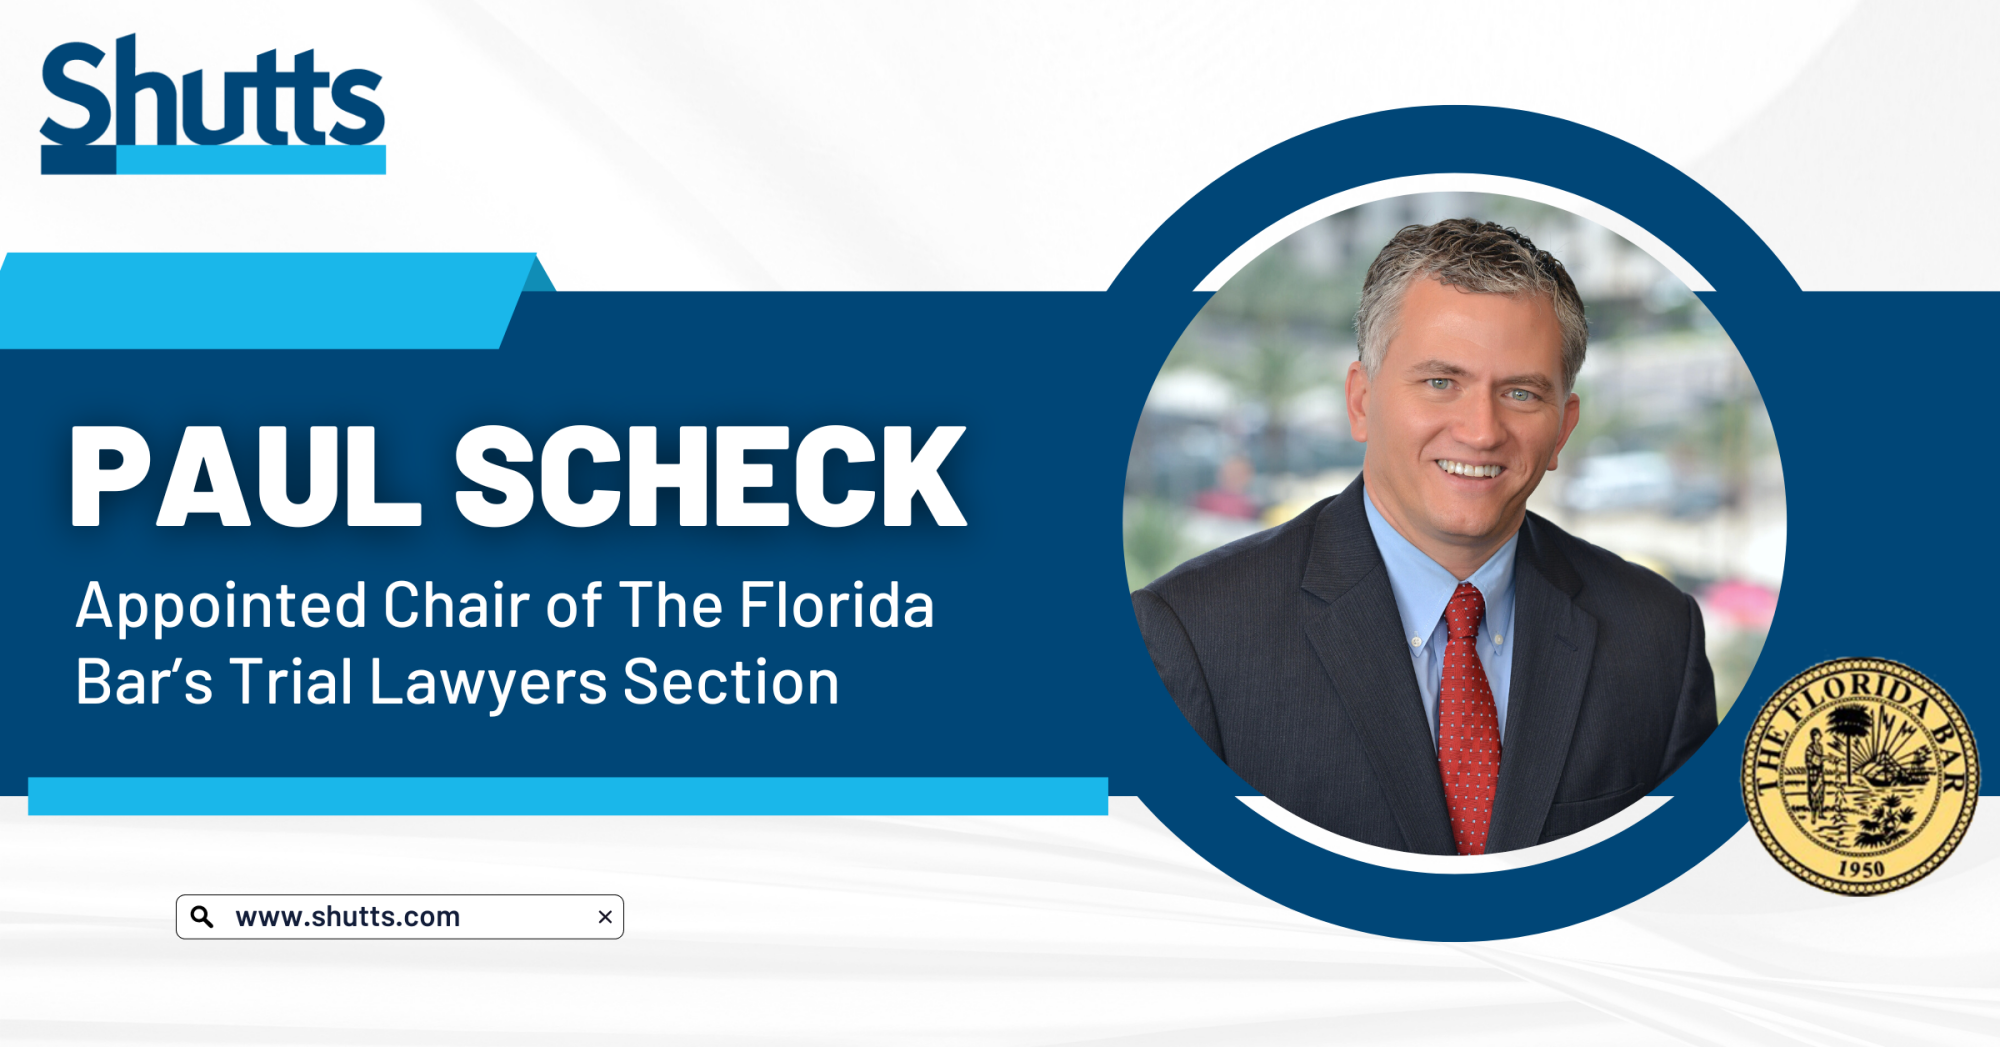 Paul Scheck Appointed Chair of The Florida Bar’s Trial Lawyers Section